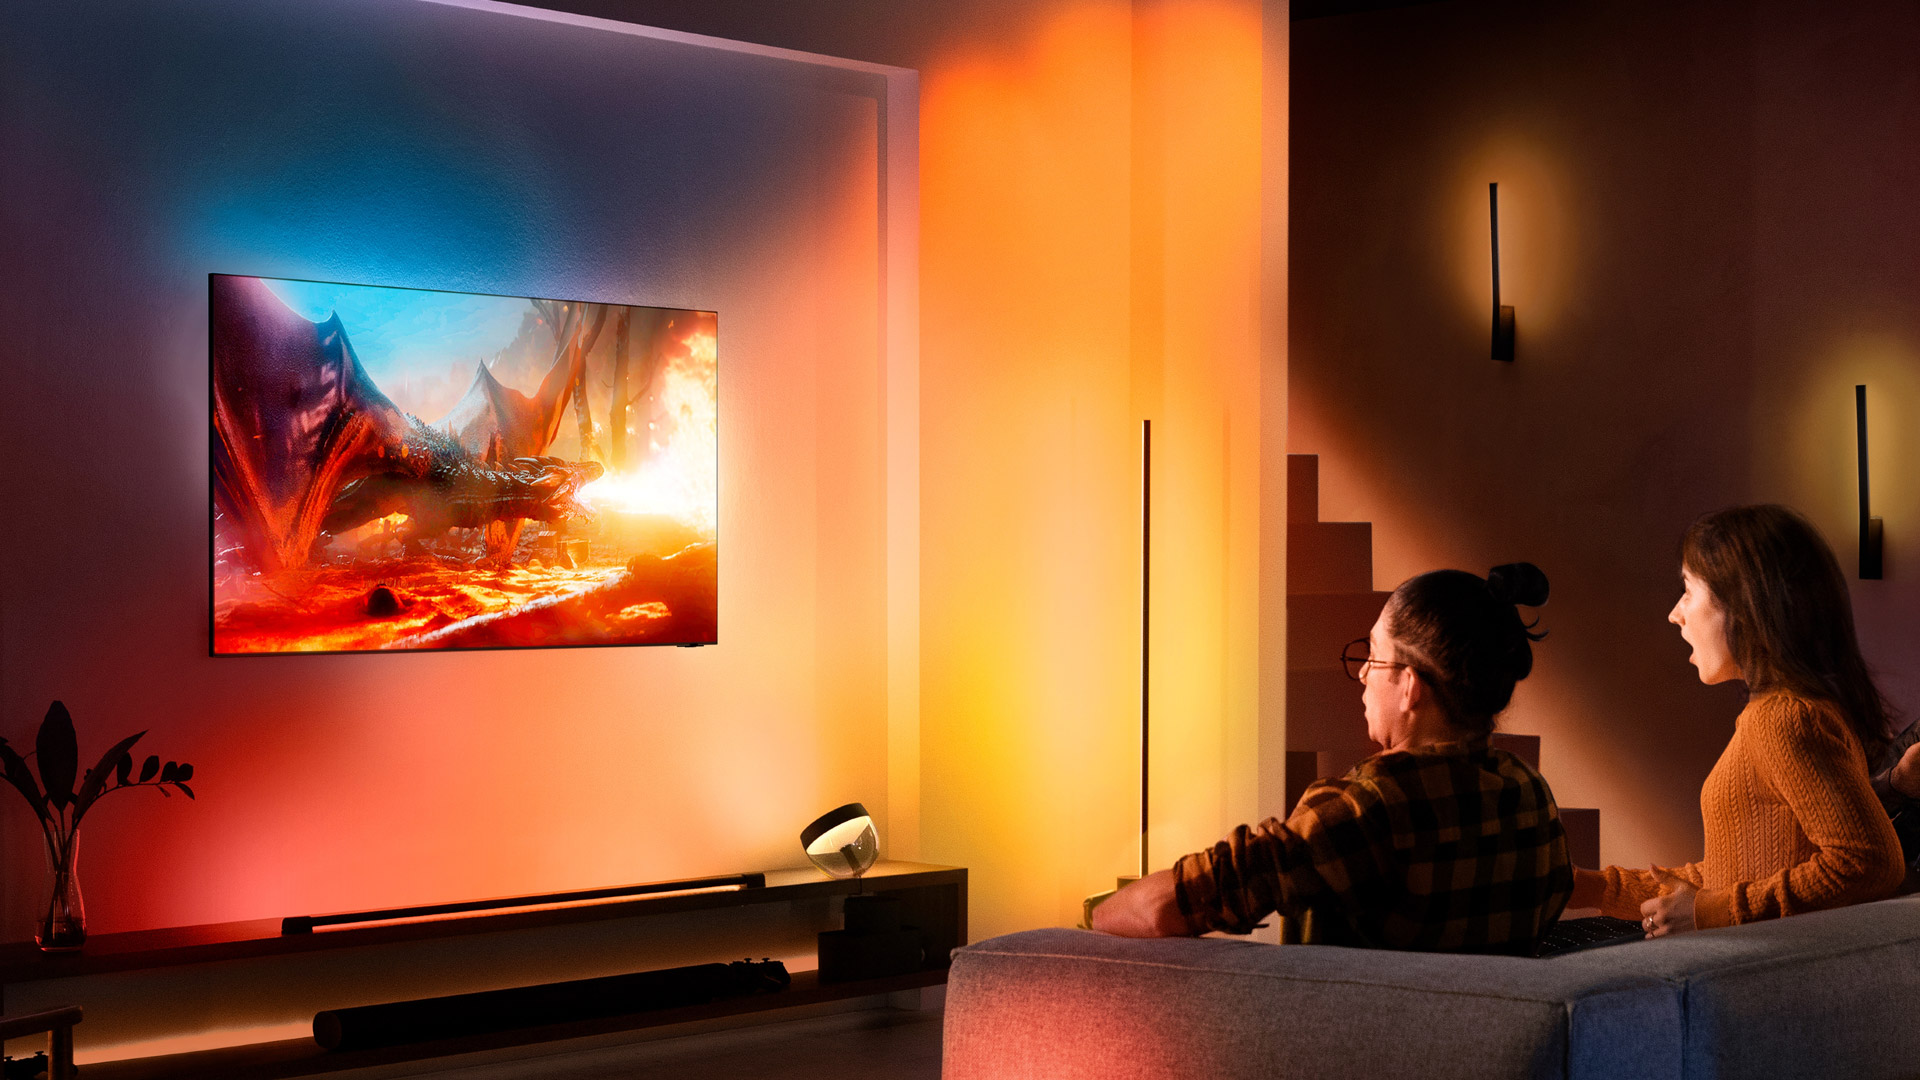 Philips Hue Sync now available for Mac, app syncs lighting to games,  videos, and music - 9to5Mac